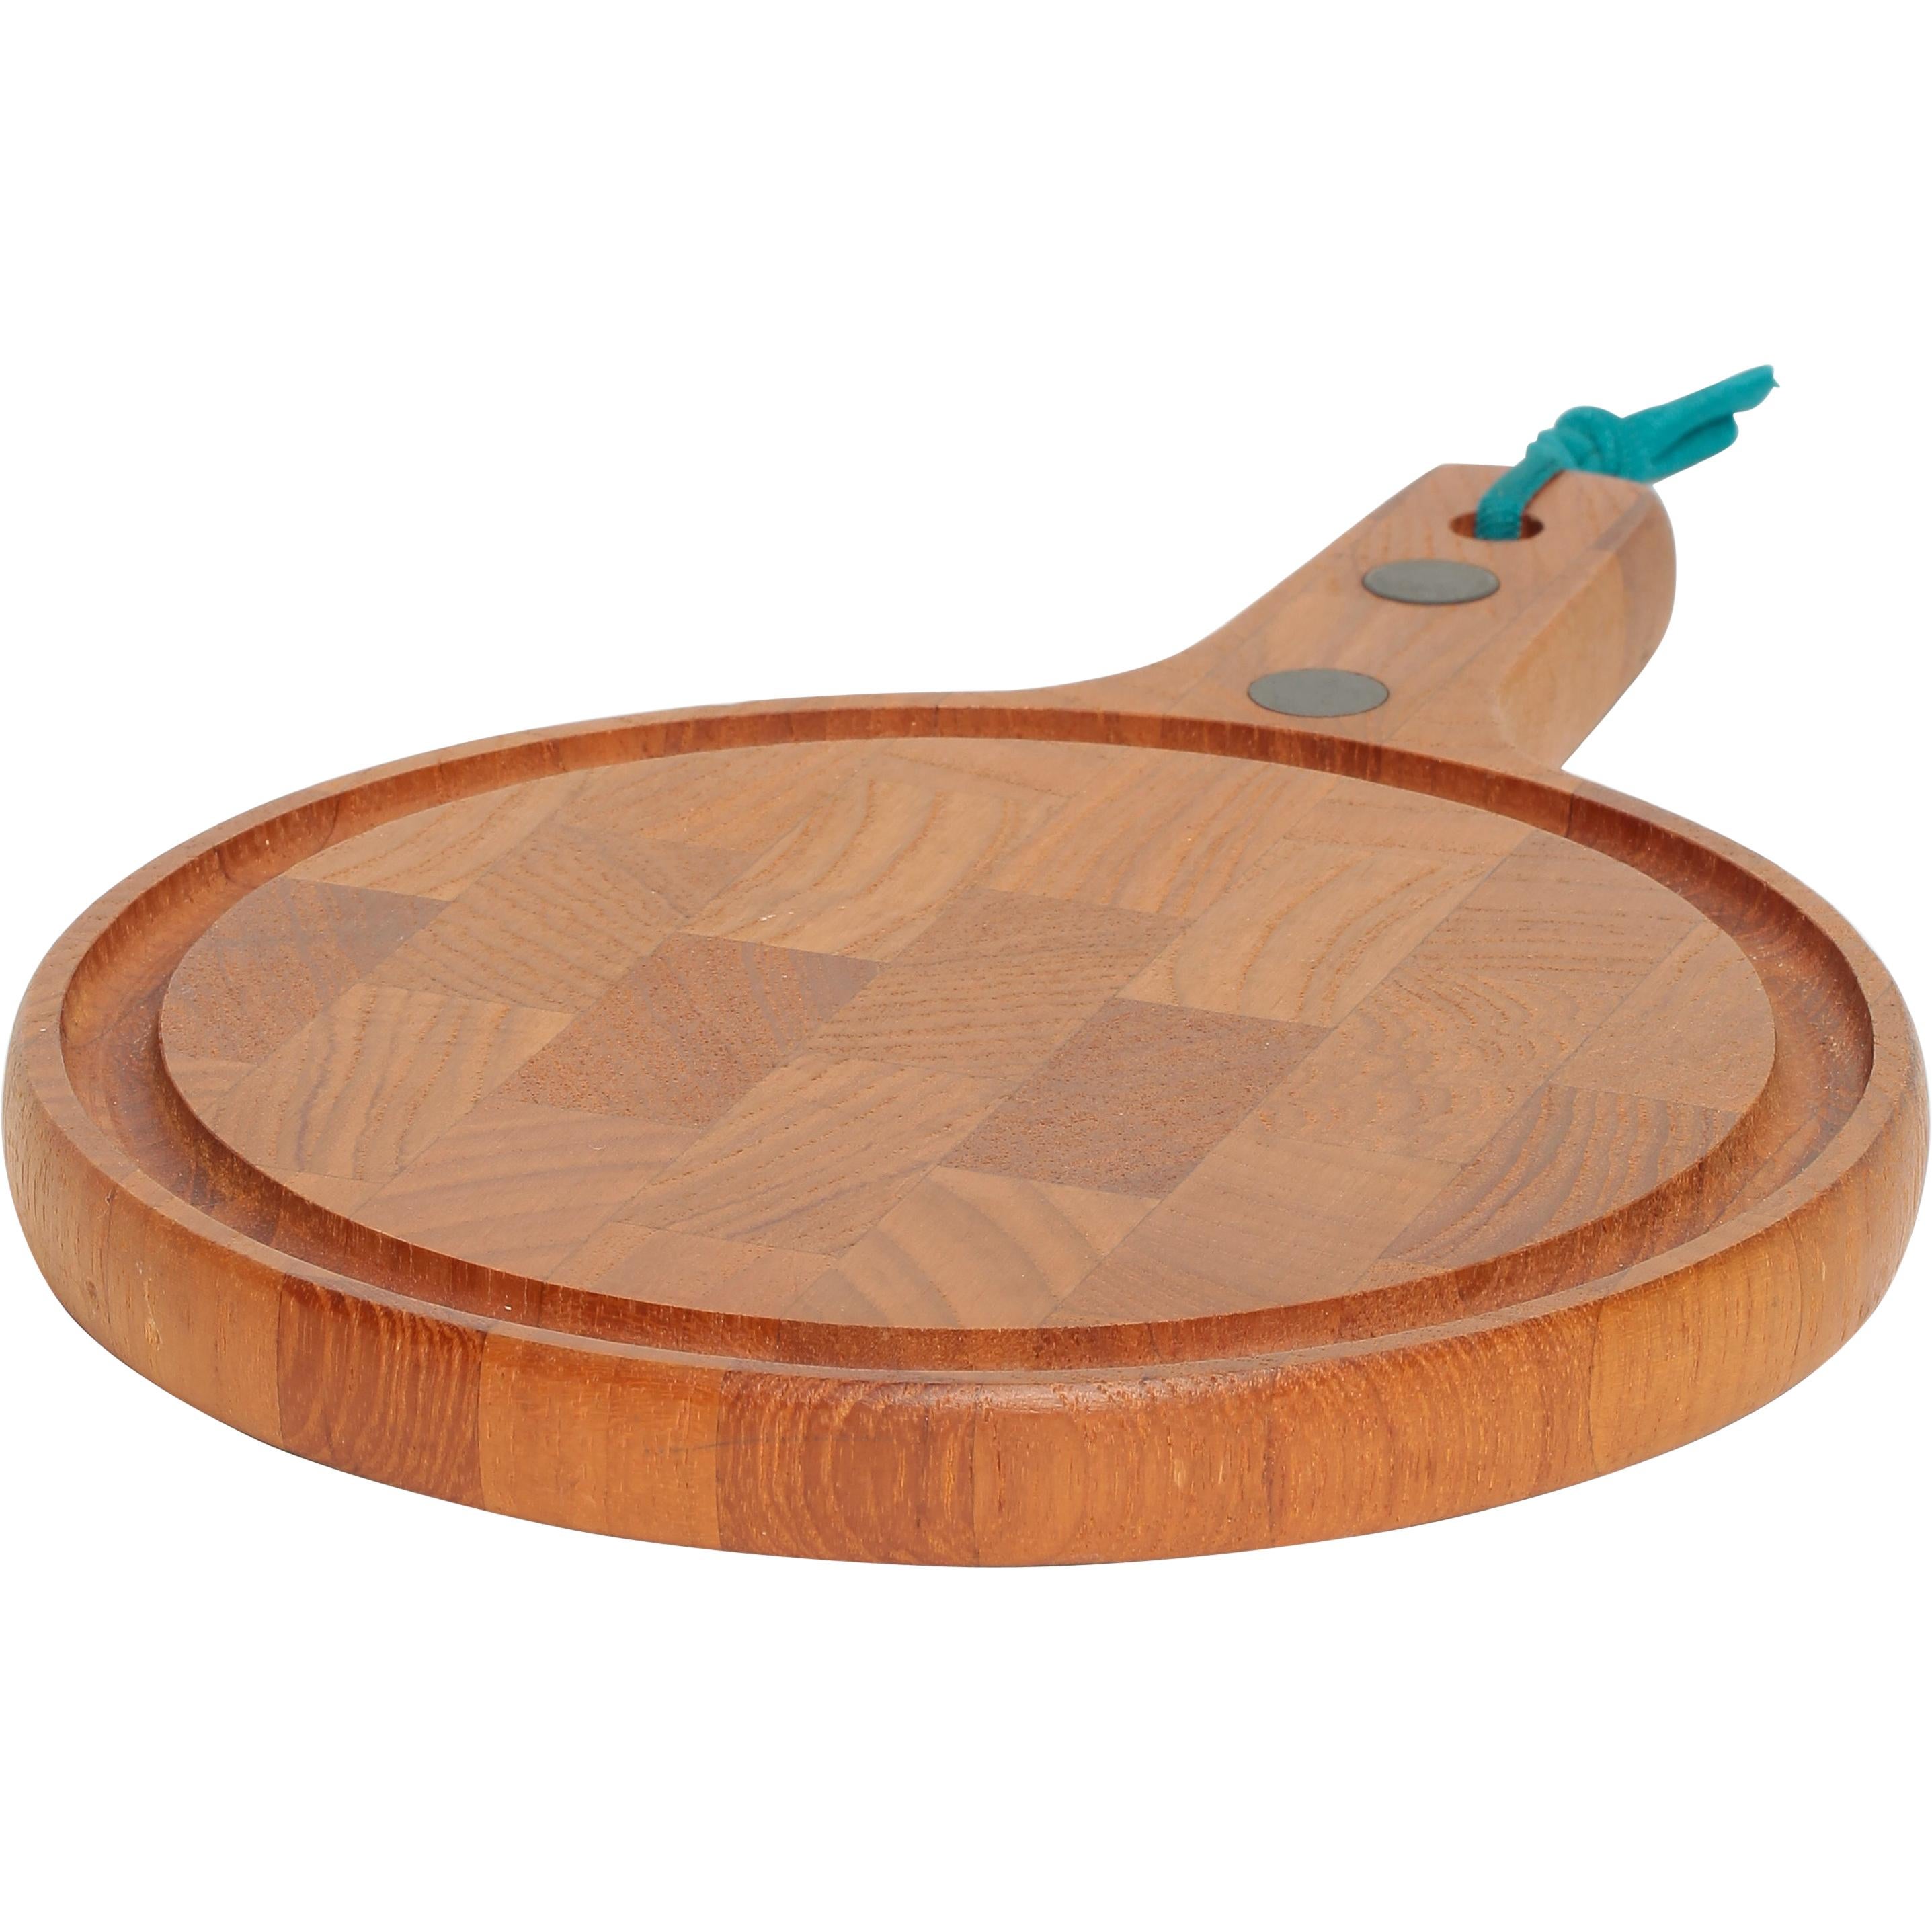 Digsmed Teak Chopping Board, 1970s For Sale